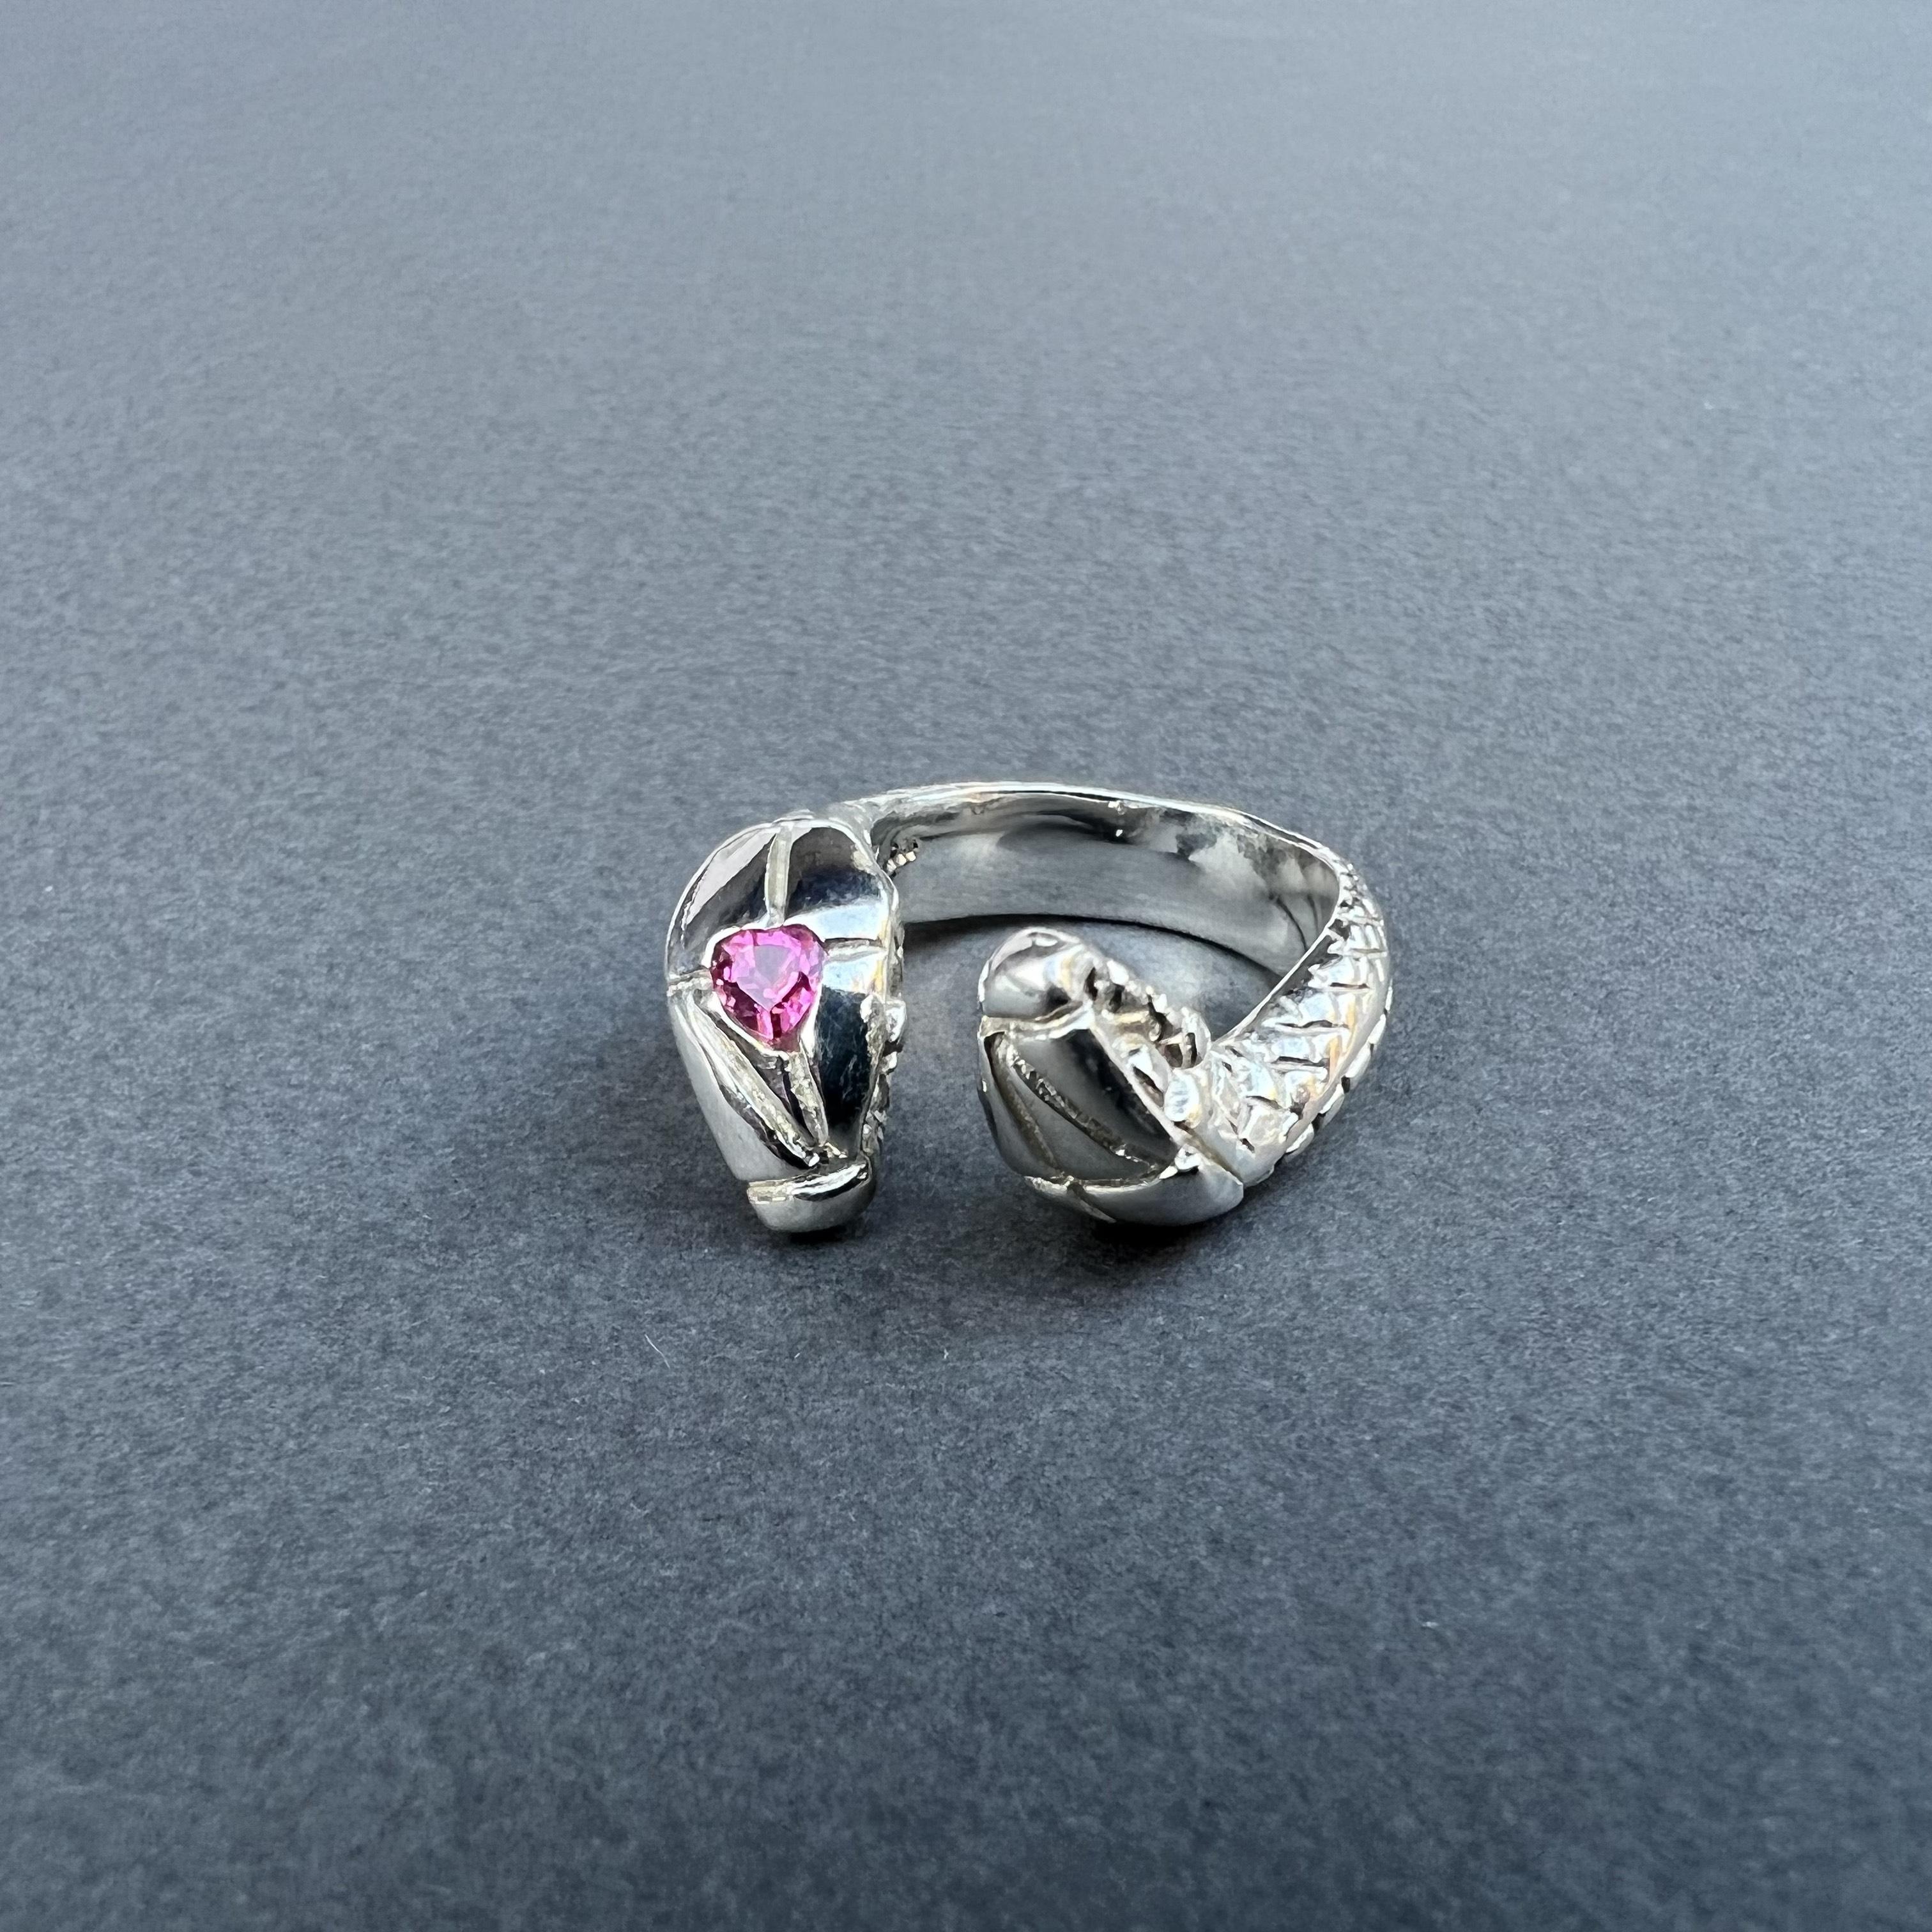 Heart Pink Sapphire Snake Ring Cocktail Ring Animal Jewelry J Dauphin

This ring has one large  Heart Pink Sapphire on the head of one snake. Its a great gift as it is adjustable - and you can use on any finger and just squeeze it on your